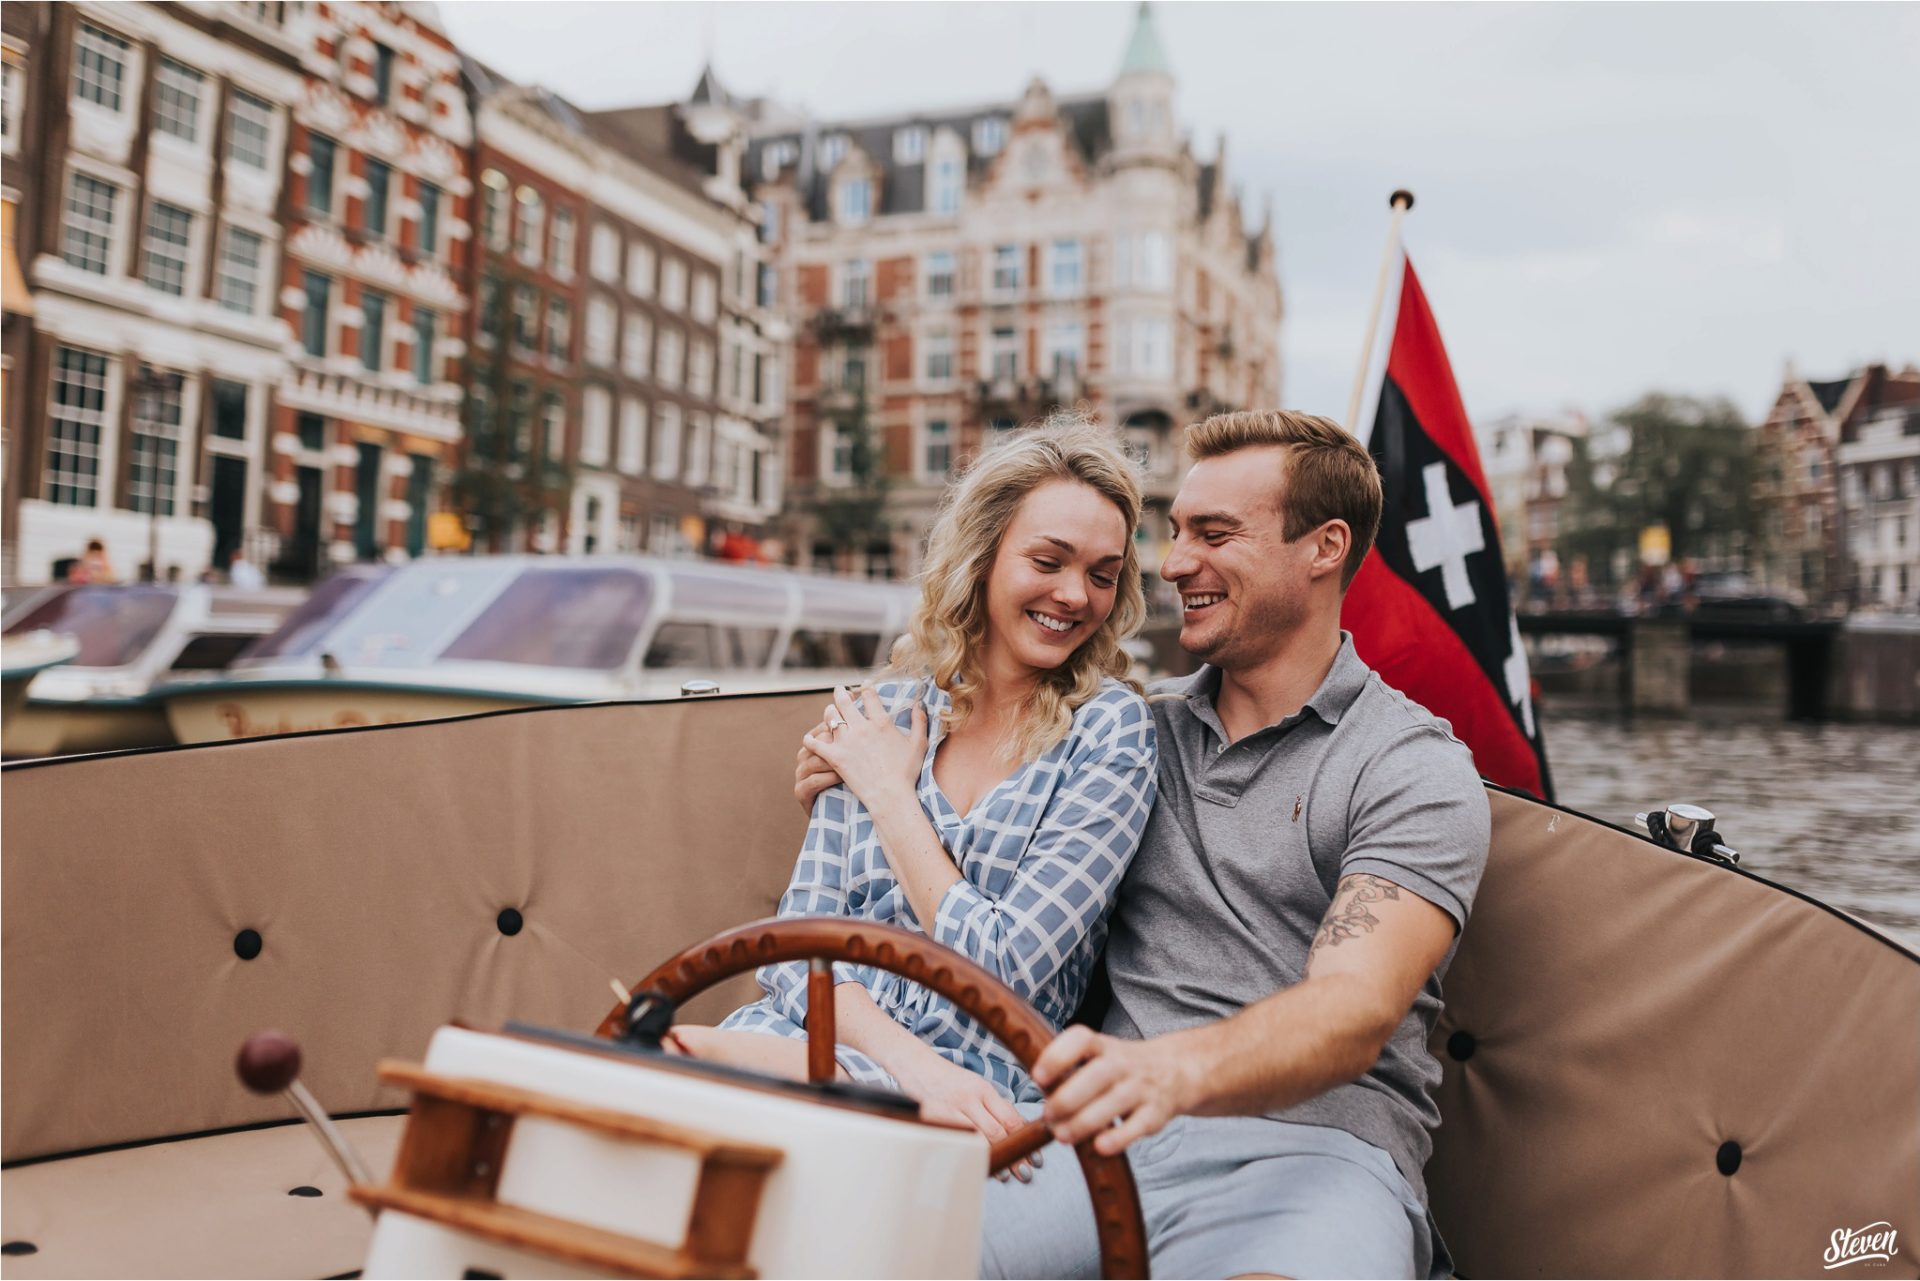 2017-09-20_0019-1920x1281 Canals of Amsterdam Engagement: Yllena and Stas Engagement 